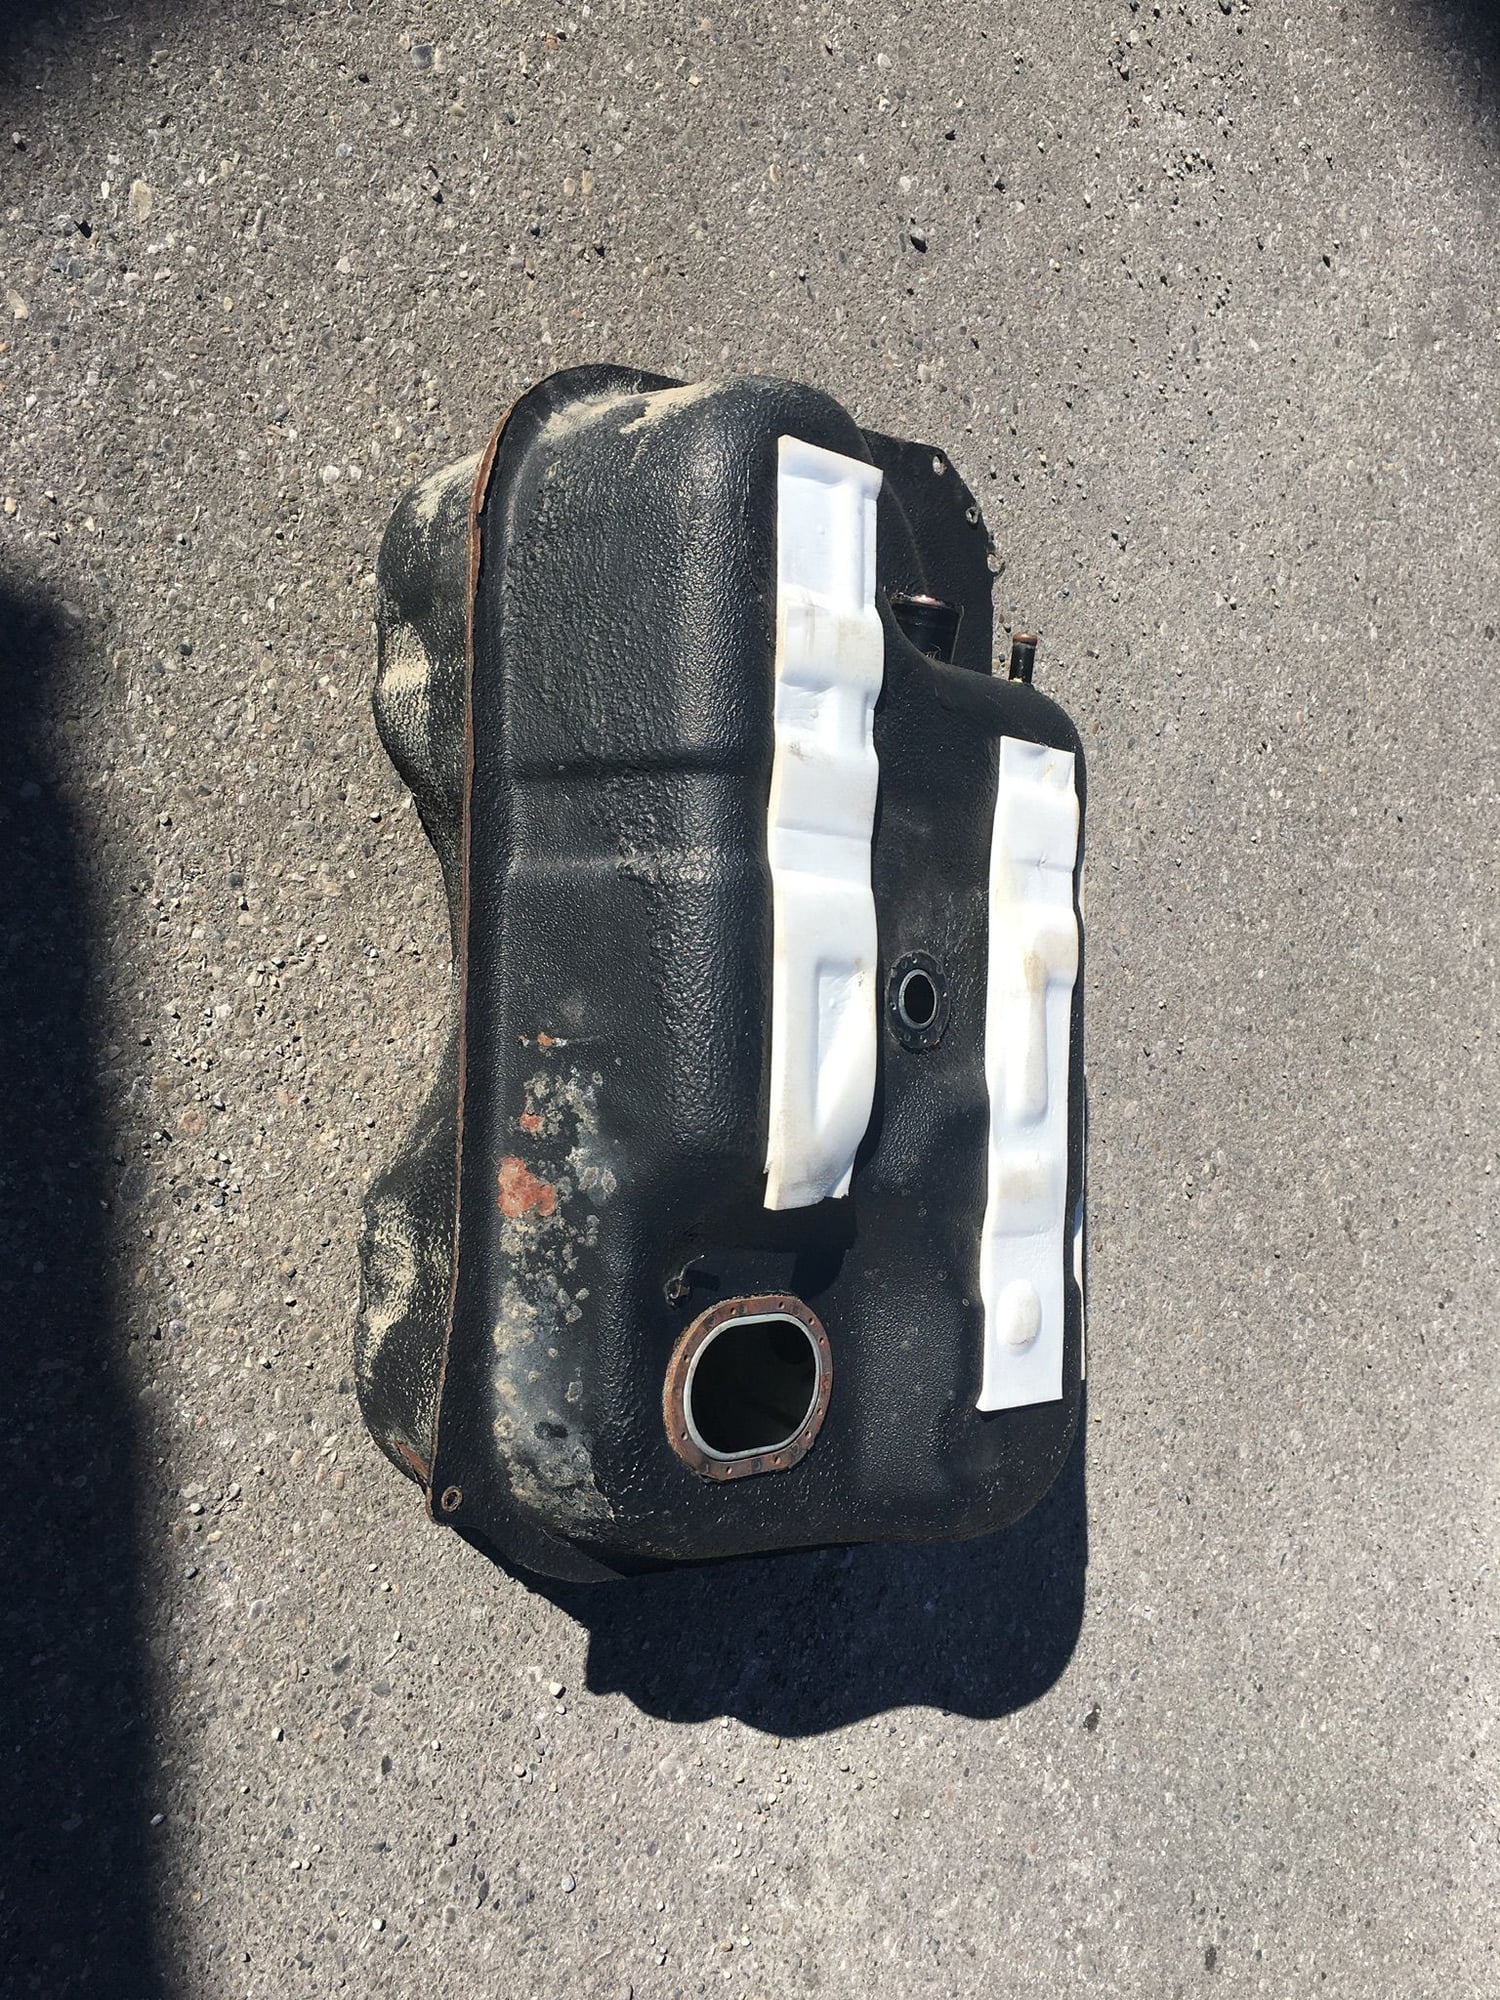 Miscellaneous - RX7 Fuel tank - Used - 1988 to 1990 Mazda RX-7 - Calgary, AB T2N0B5, Canada